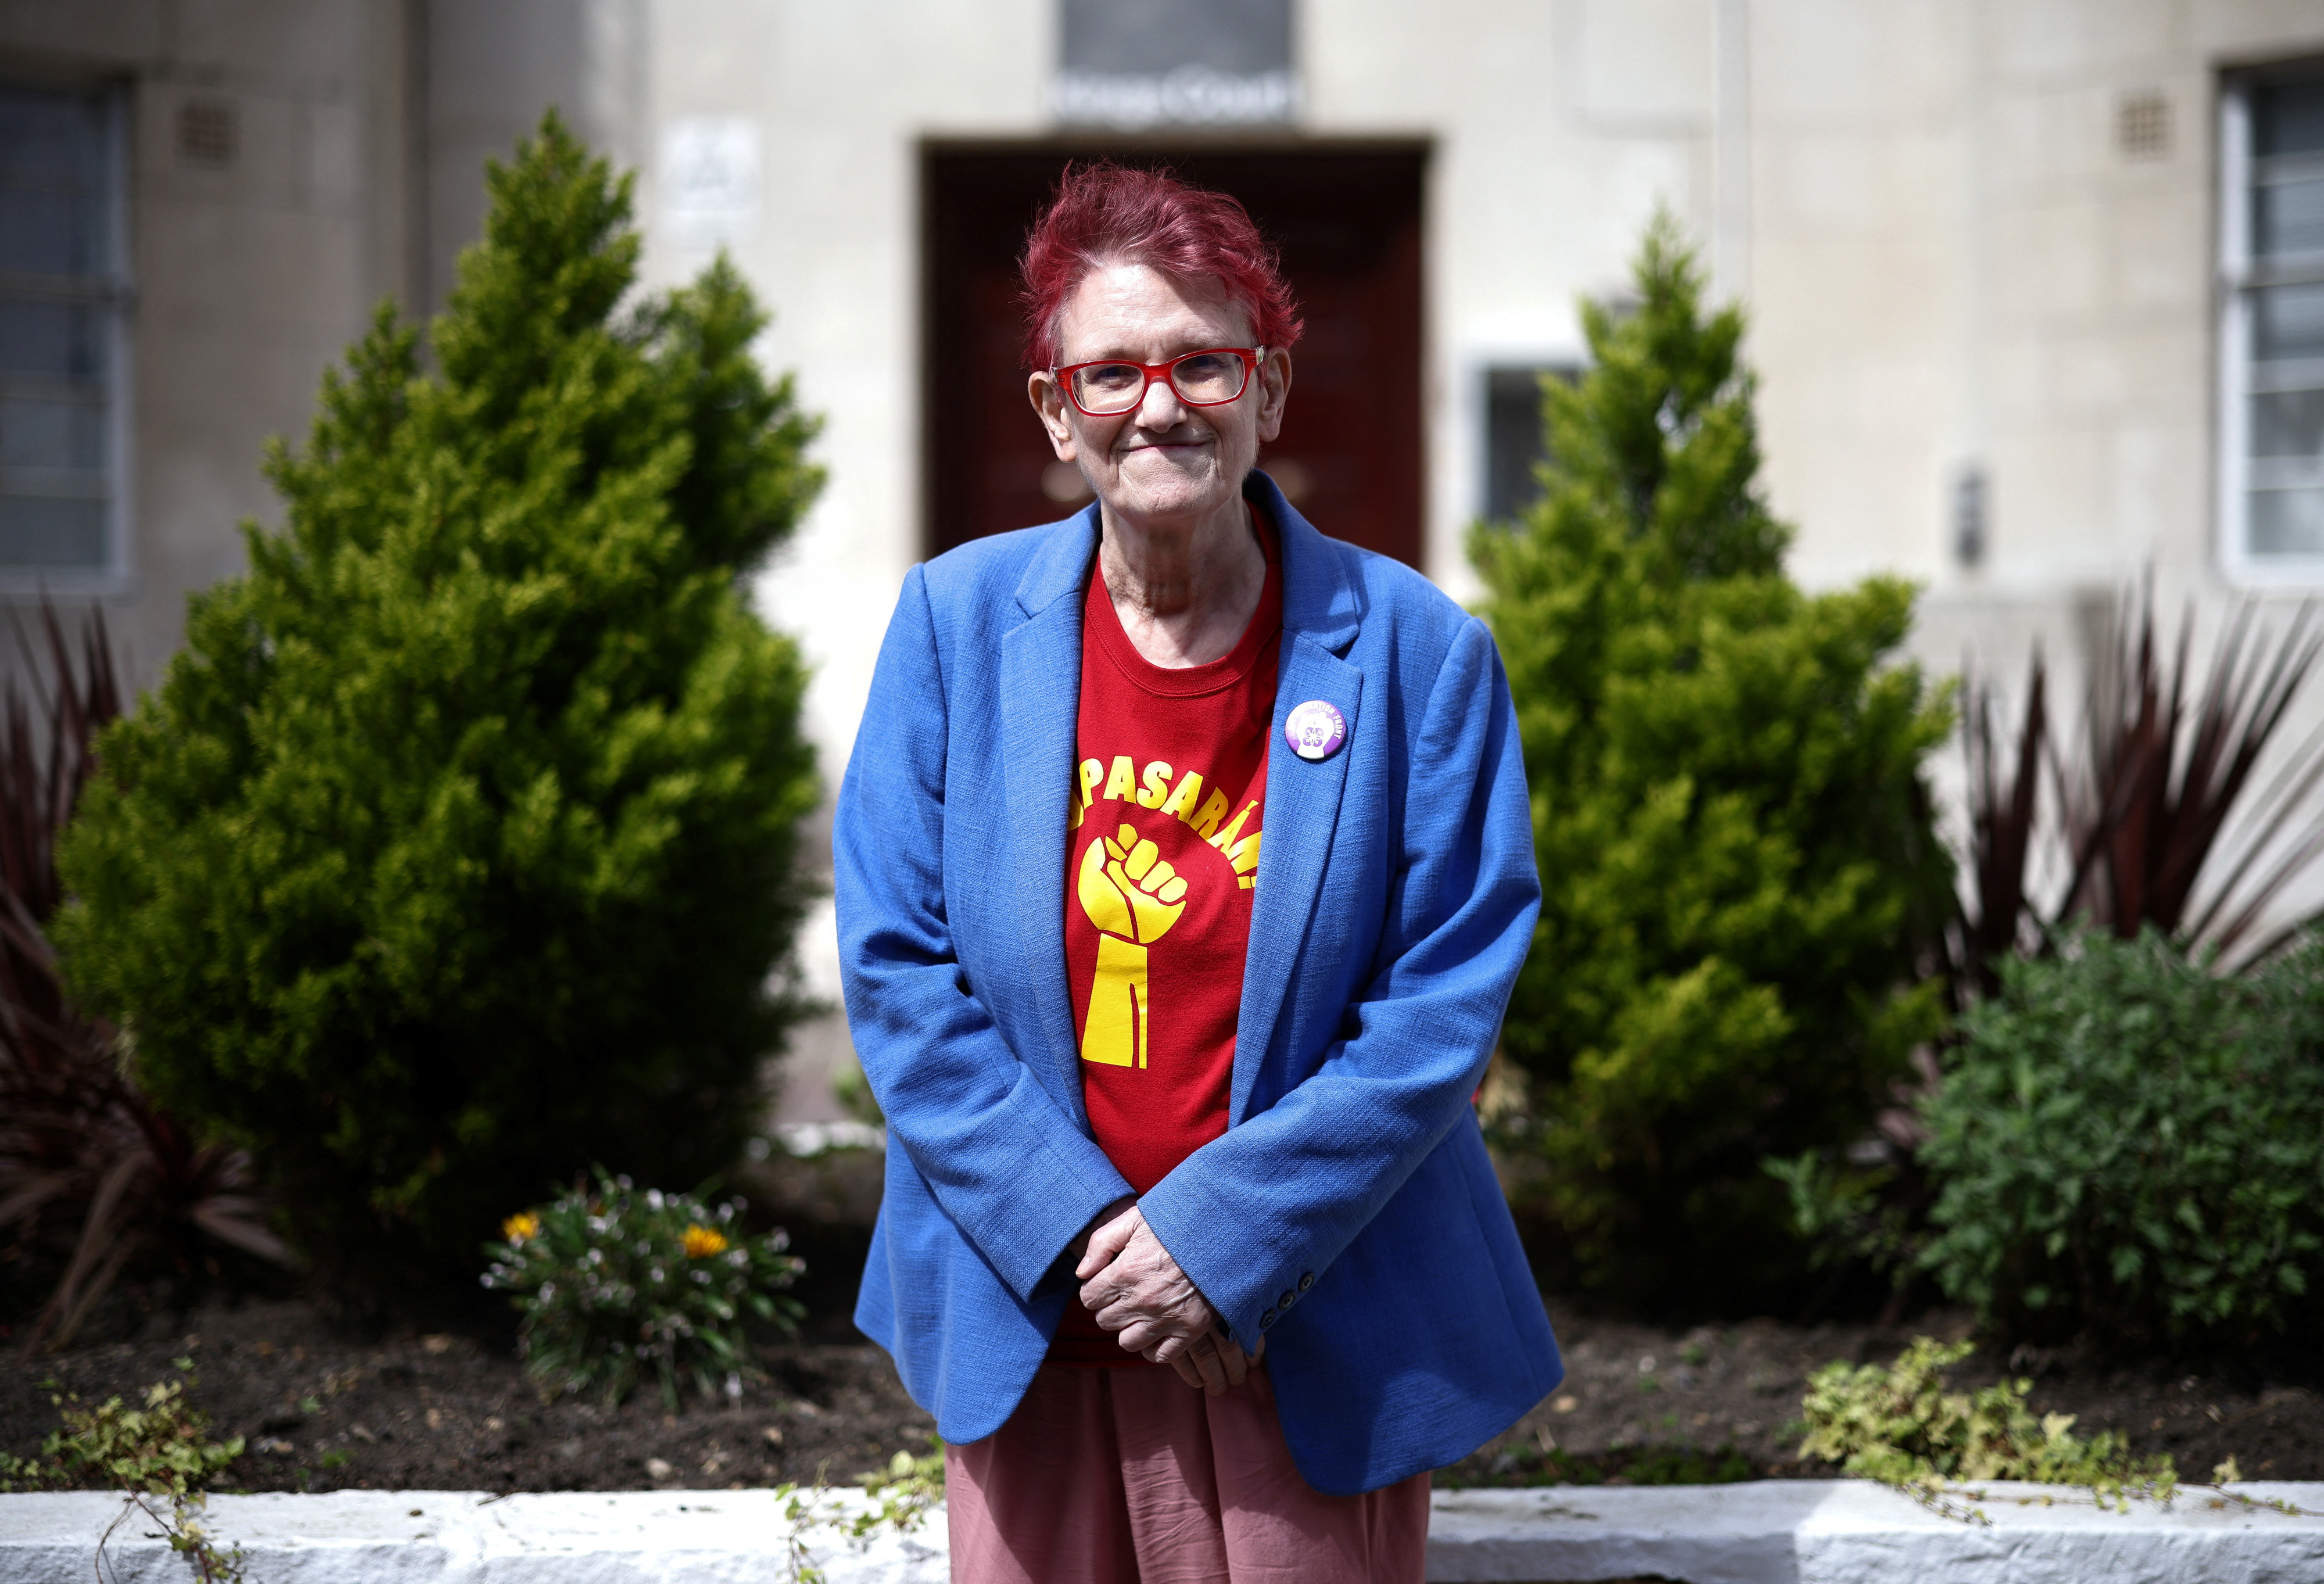 Nettie Pollard, 72, who is an LGBTQ and women's liberation activist, poses outside her home in London